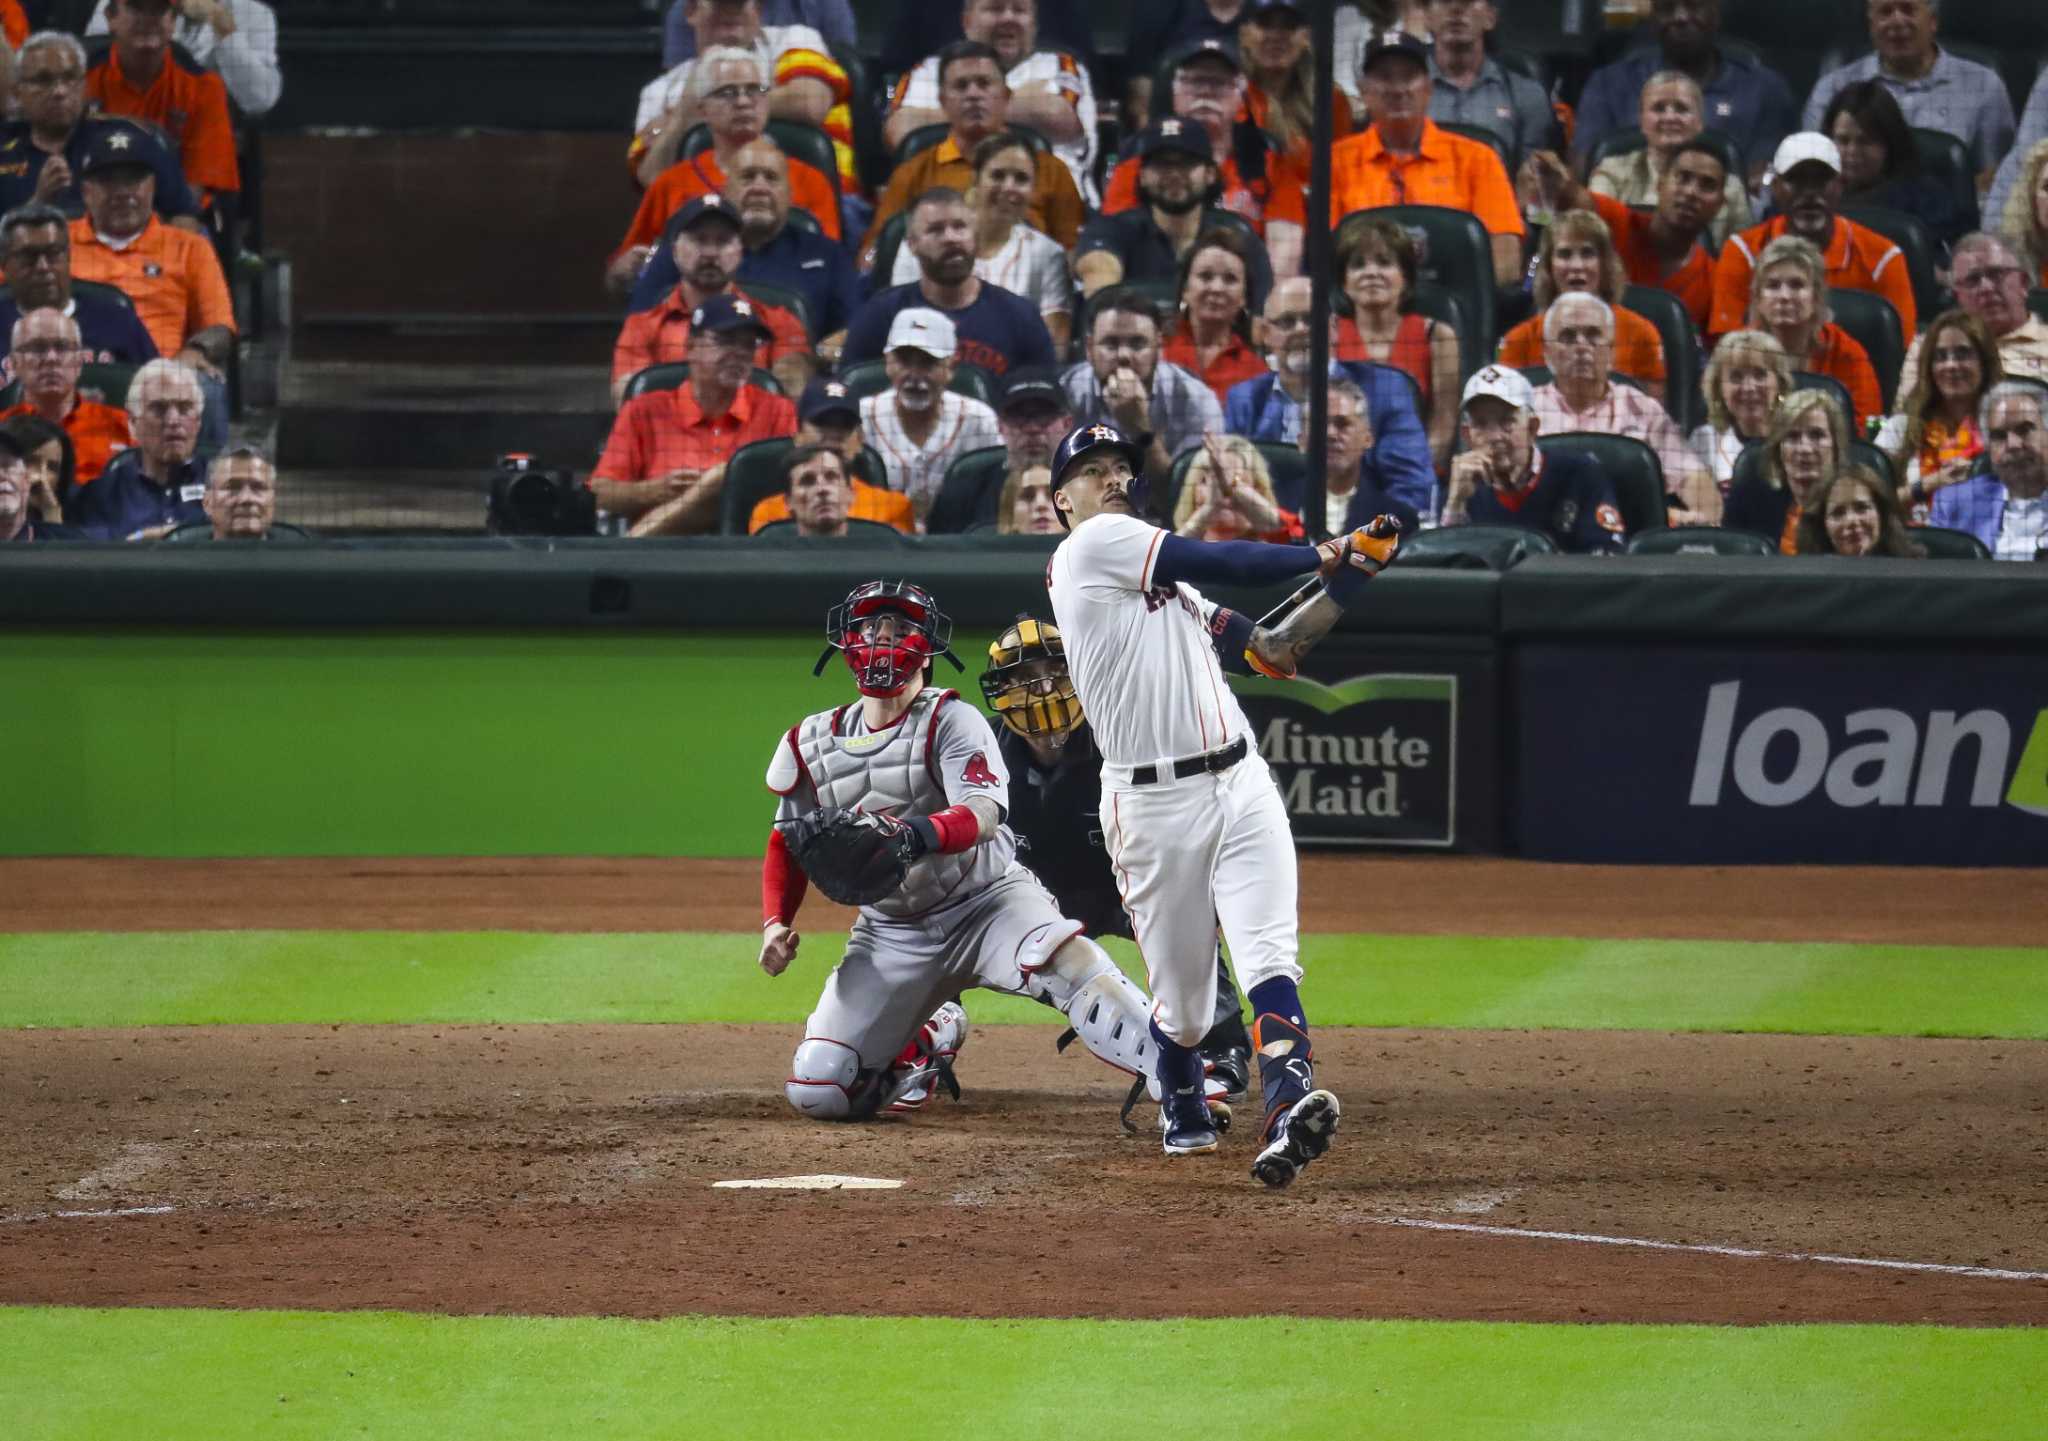 Carlos Correa makes time for memorable HR celebration in ALCS Game 1  National News - Bally Sports